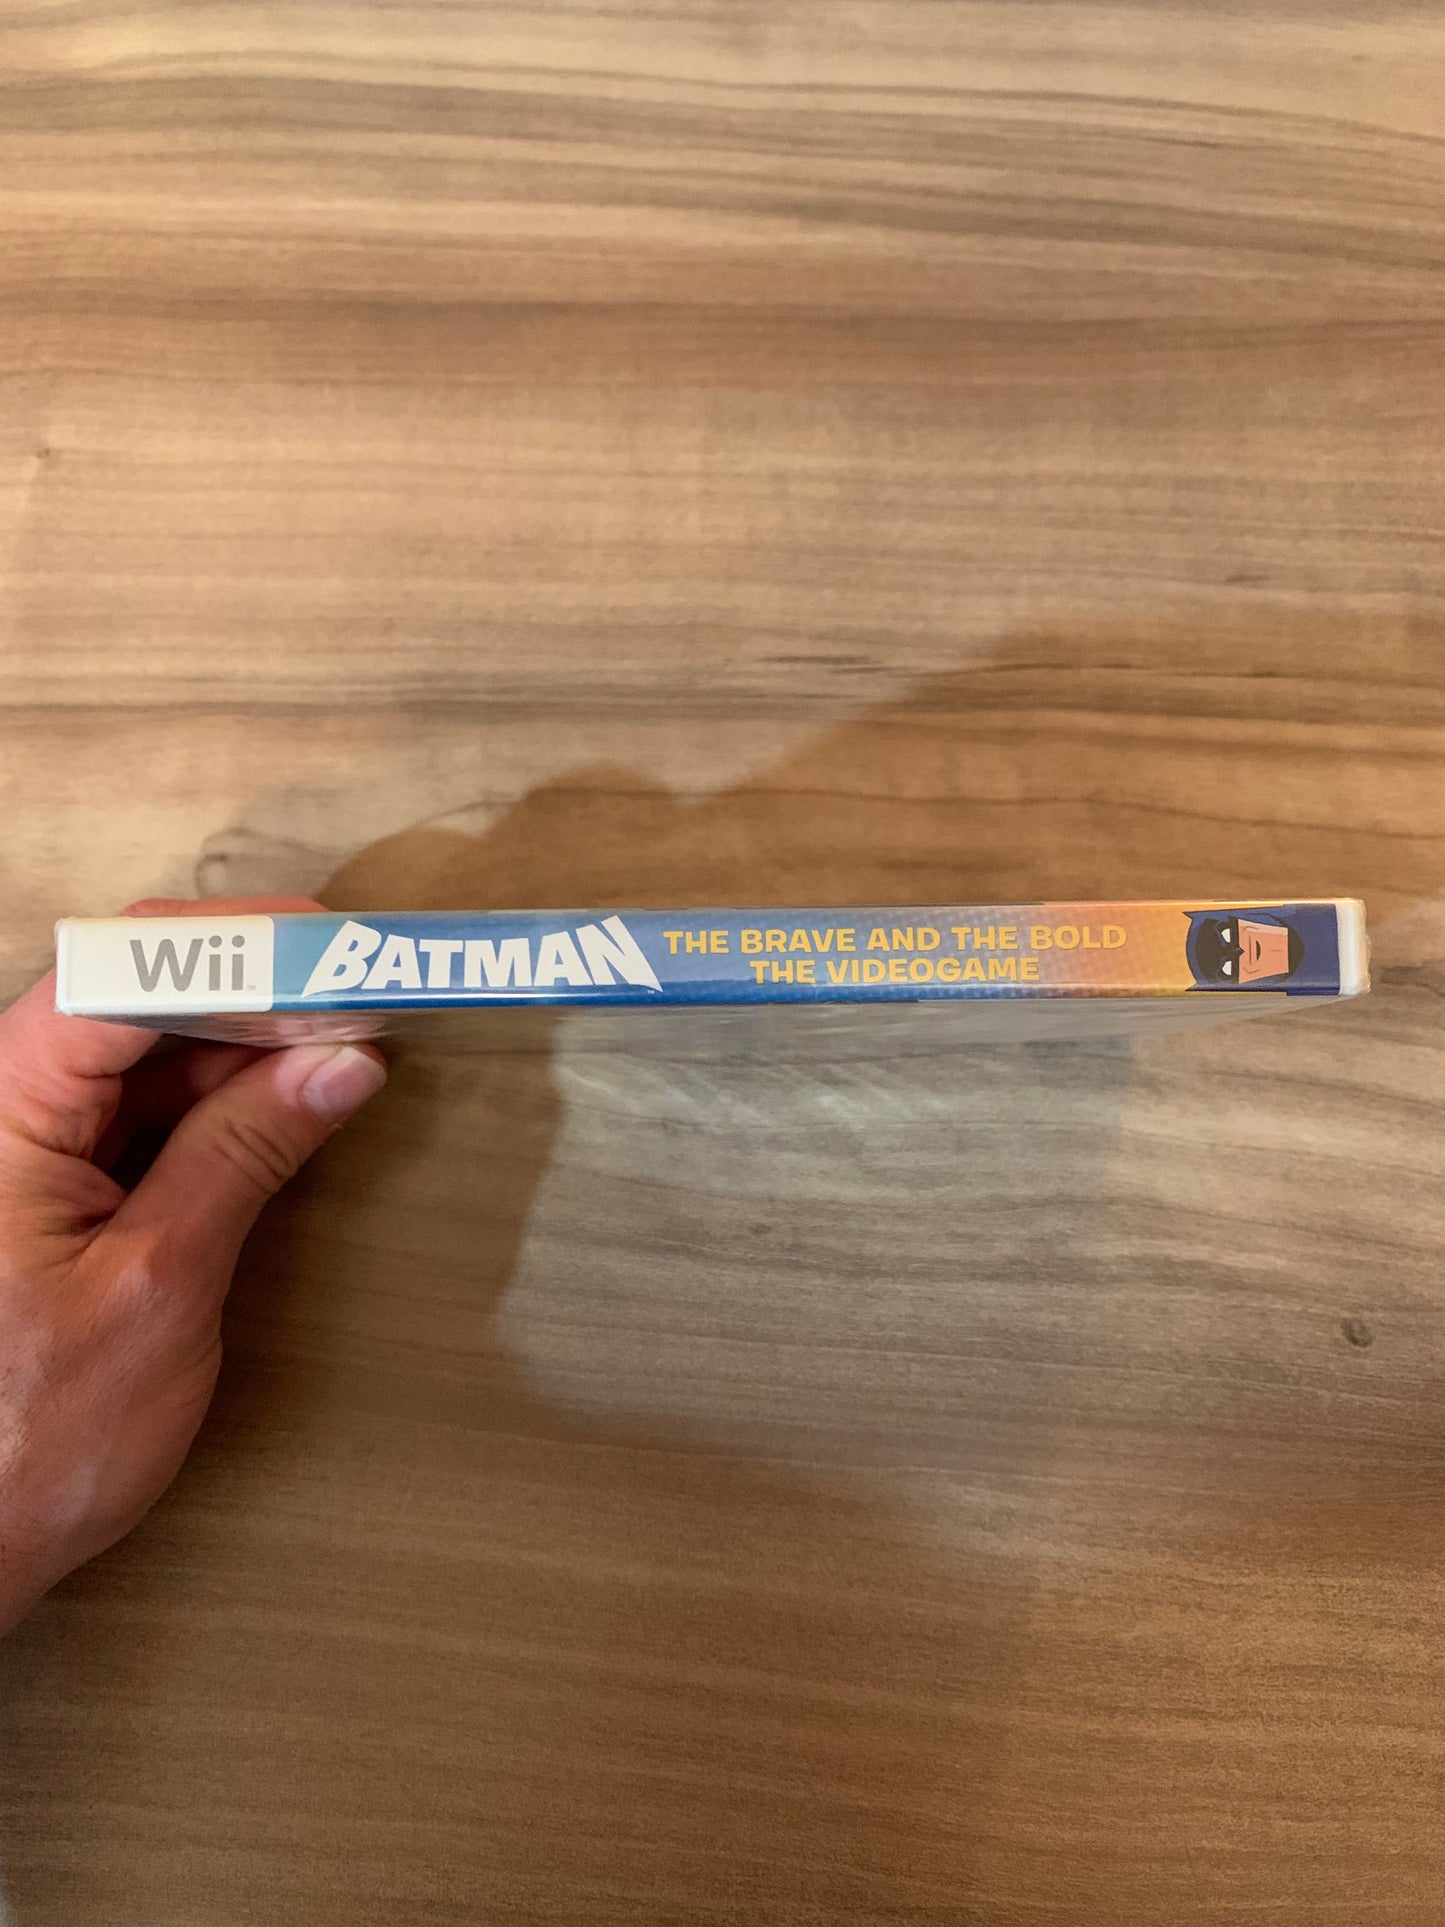 NiNTENDO Wii | BATMAN THE BRAVE AND THE BOLD THE ViDEOGAME